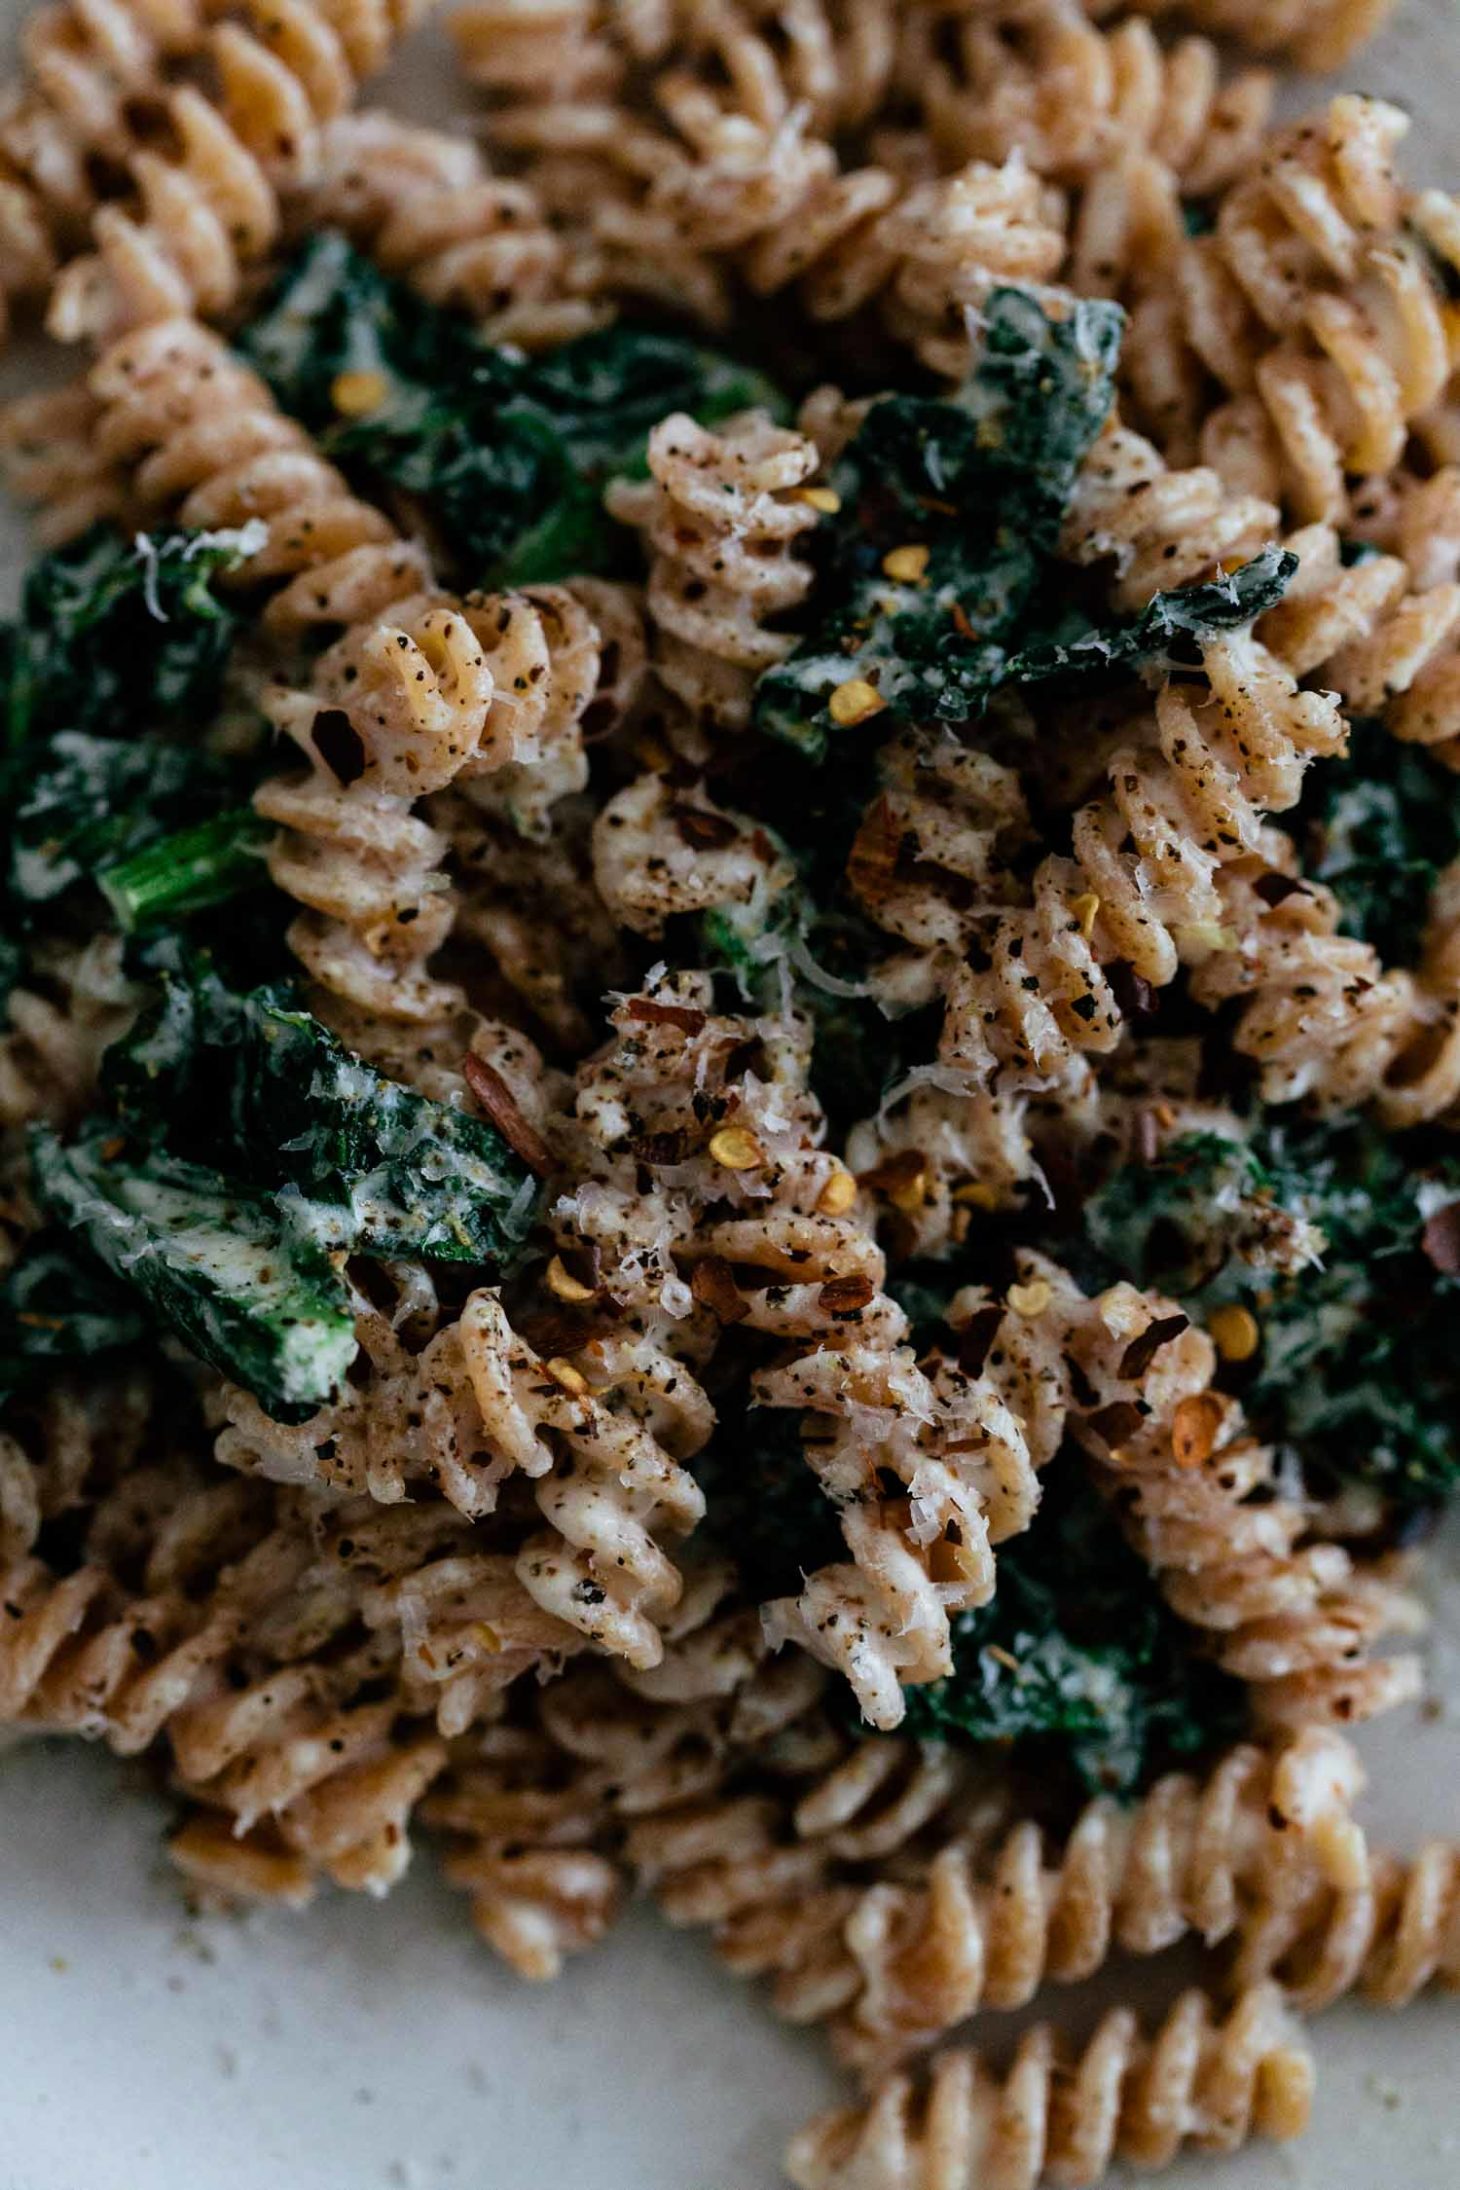 Lentil Rotini with Garlicky Kale and Goat Cheese Sauce